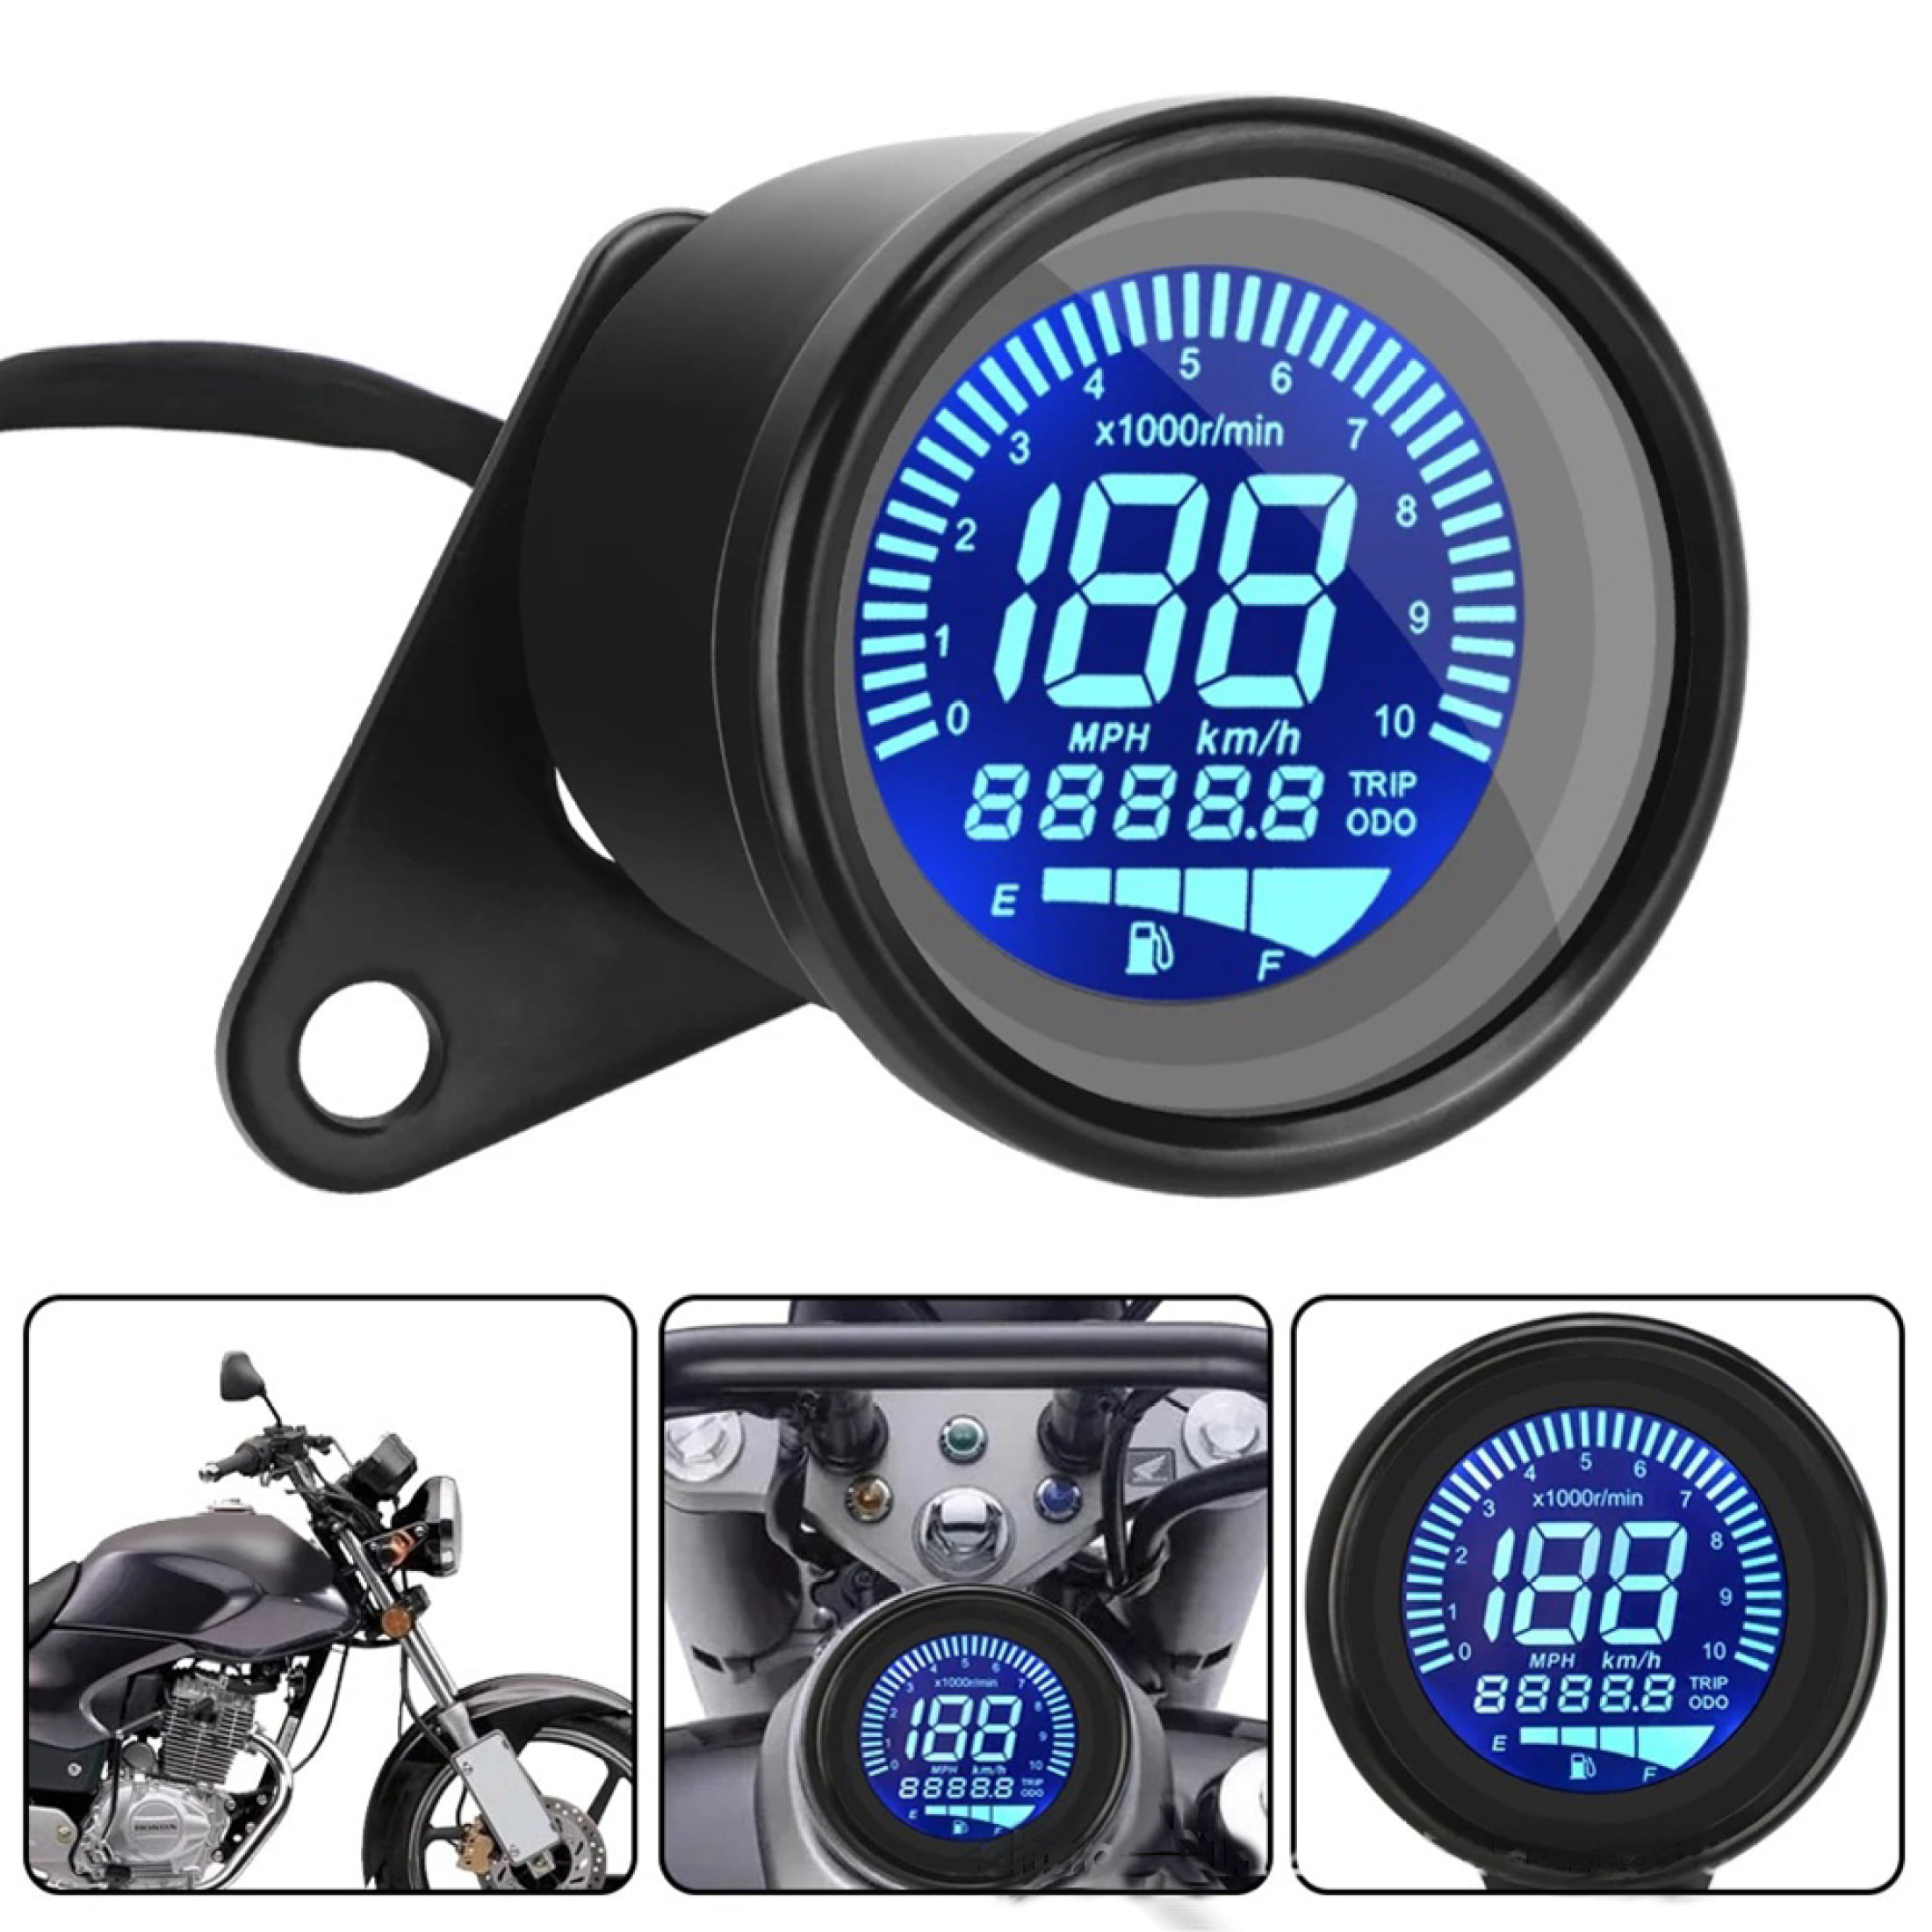 MoreChioce Motorcycle Digital GPS Speedometer with 7